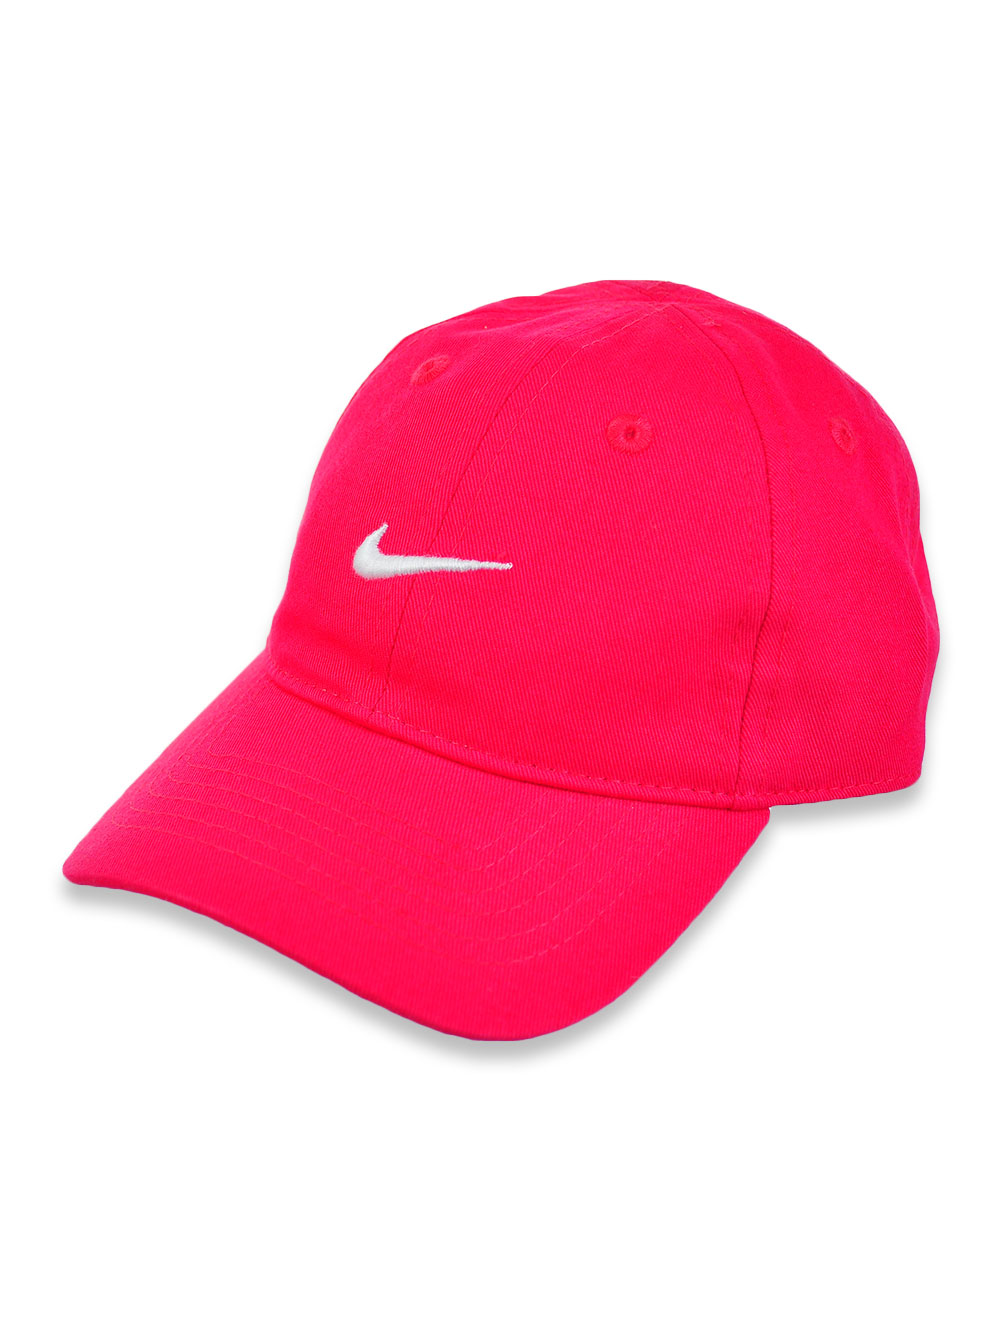 Cold Weather Accessories Baseball Cap